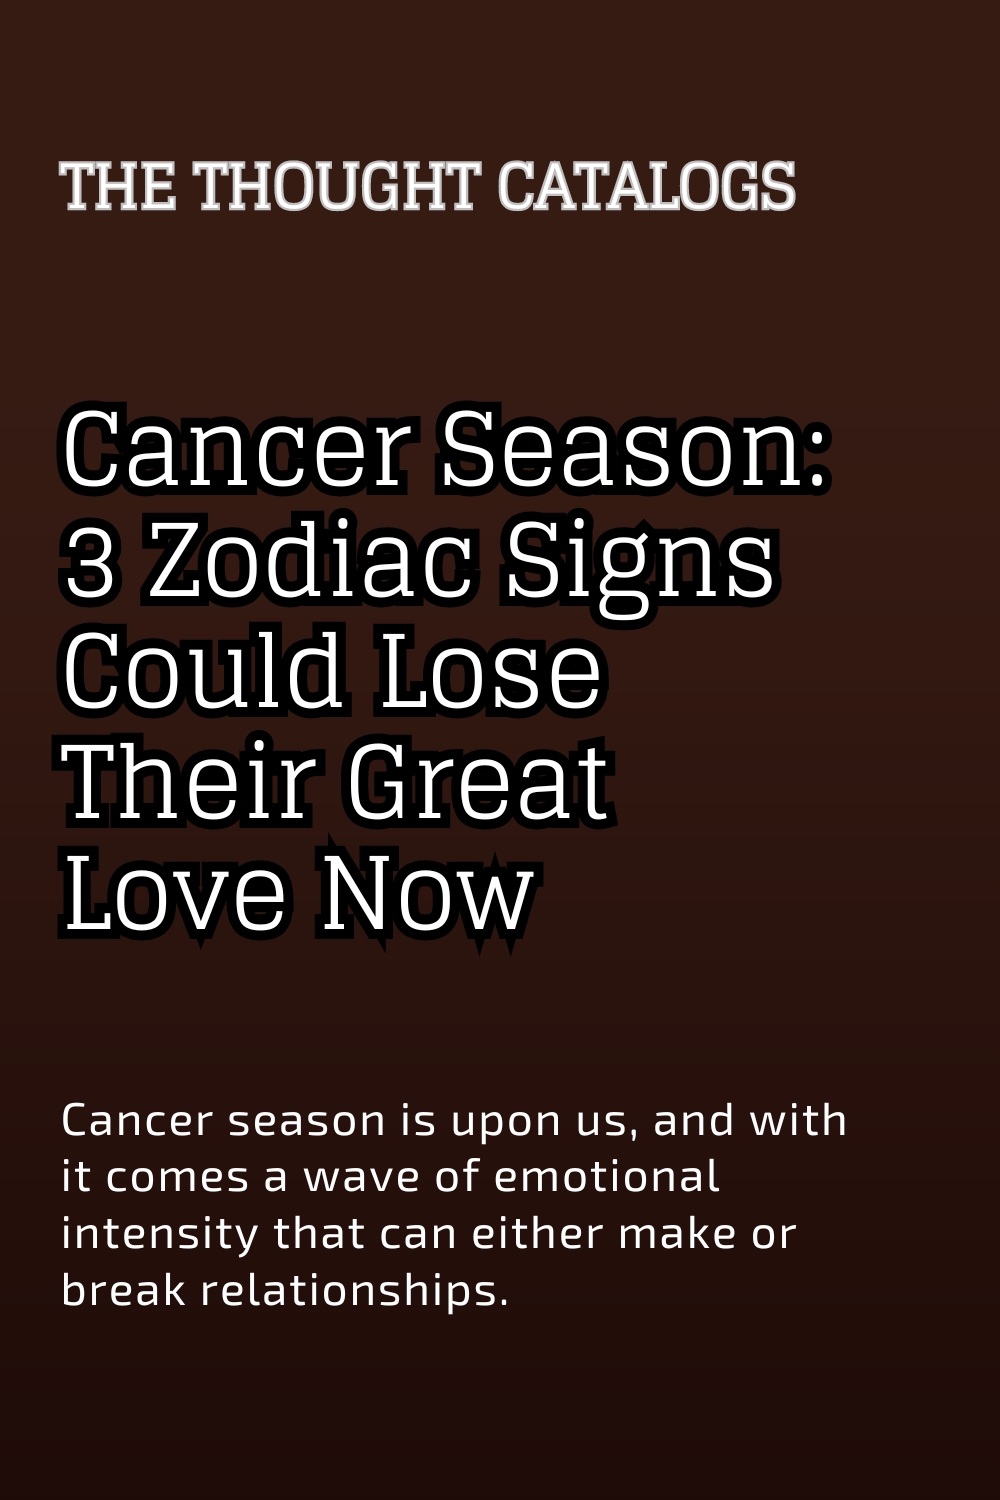 Cancer Season: 3 Zodiac Signs Could Lose Their Great Love Now